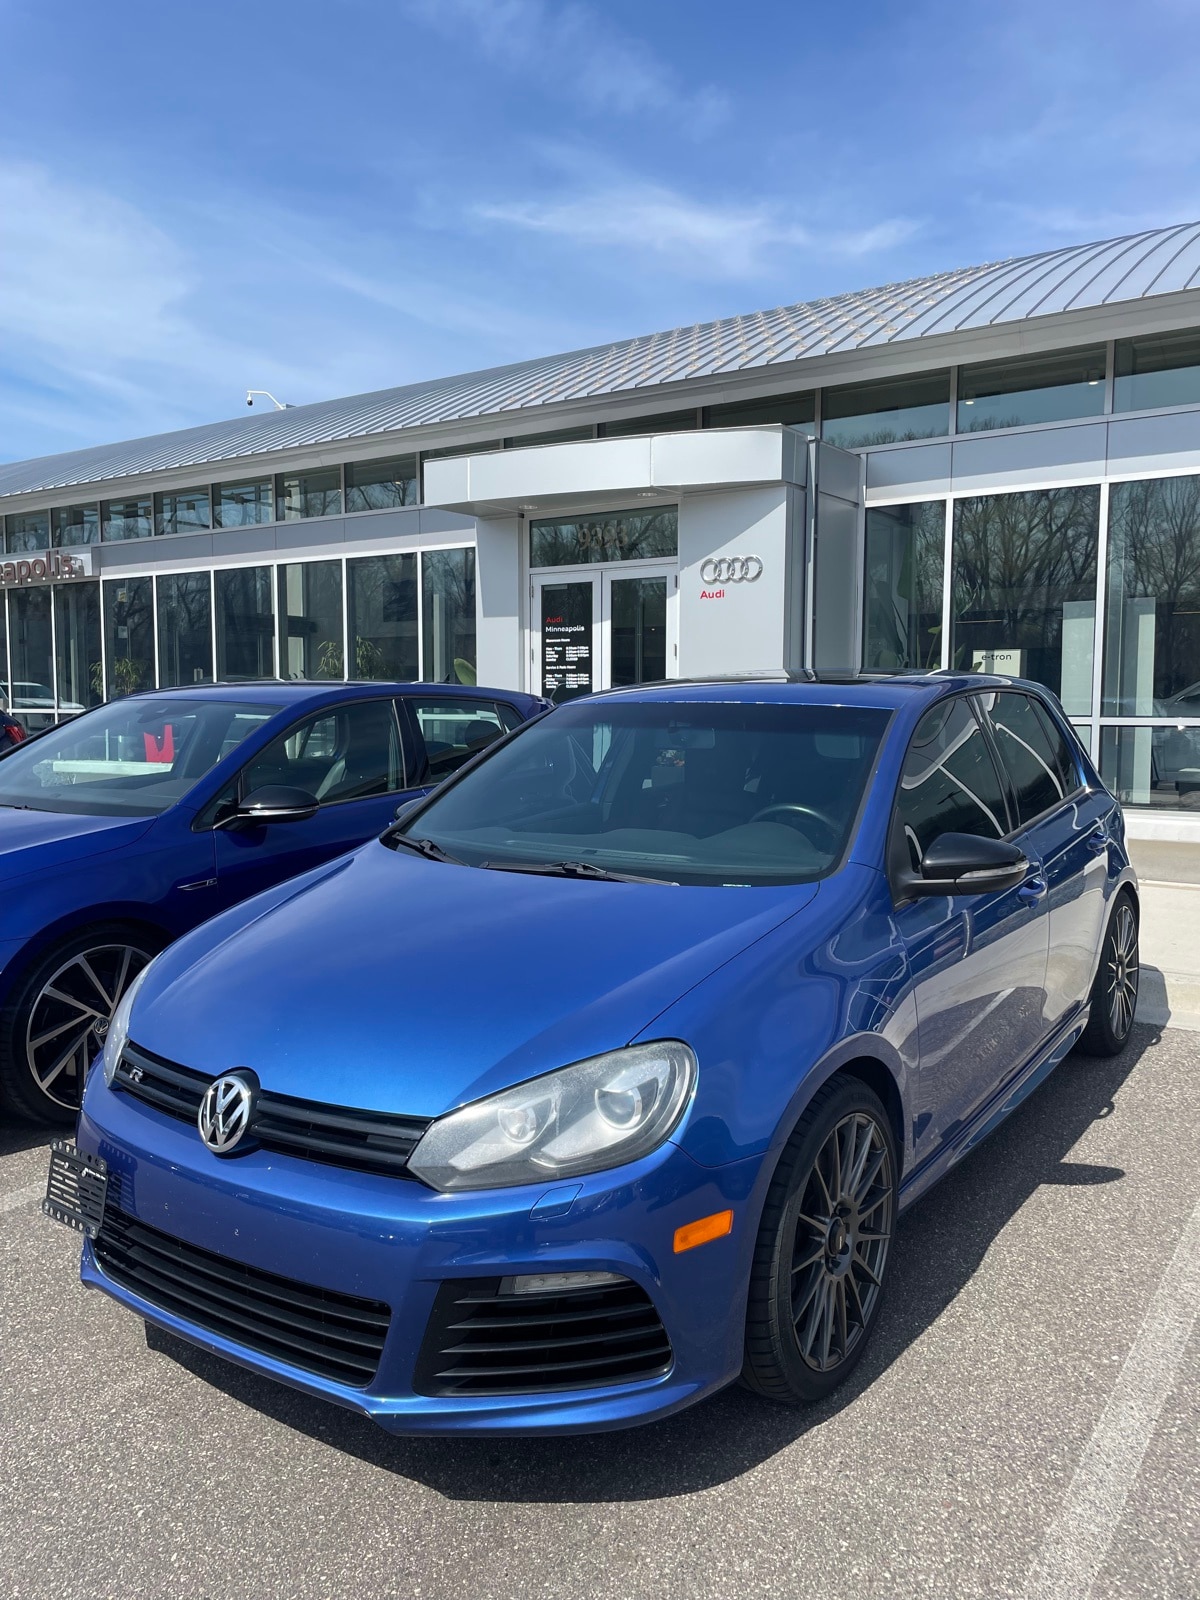 Used 2013 Volkswagen Golf R with VIN WVWPF7AJ7DW118210 for sale in Minneapolis, Minnesota